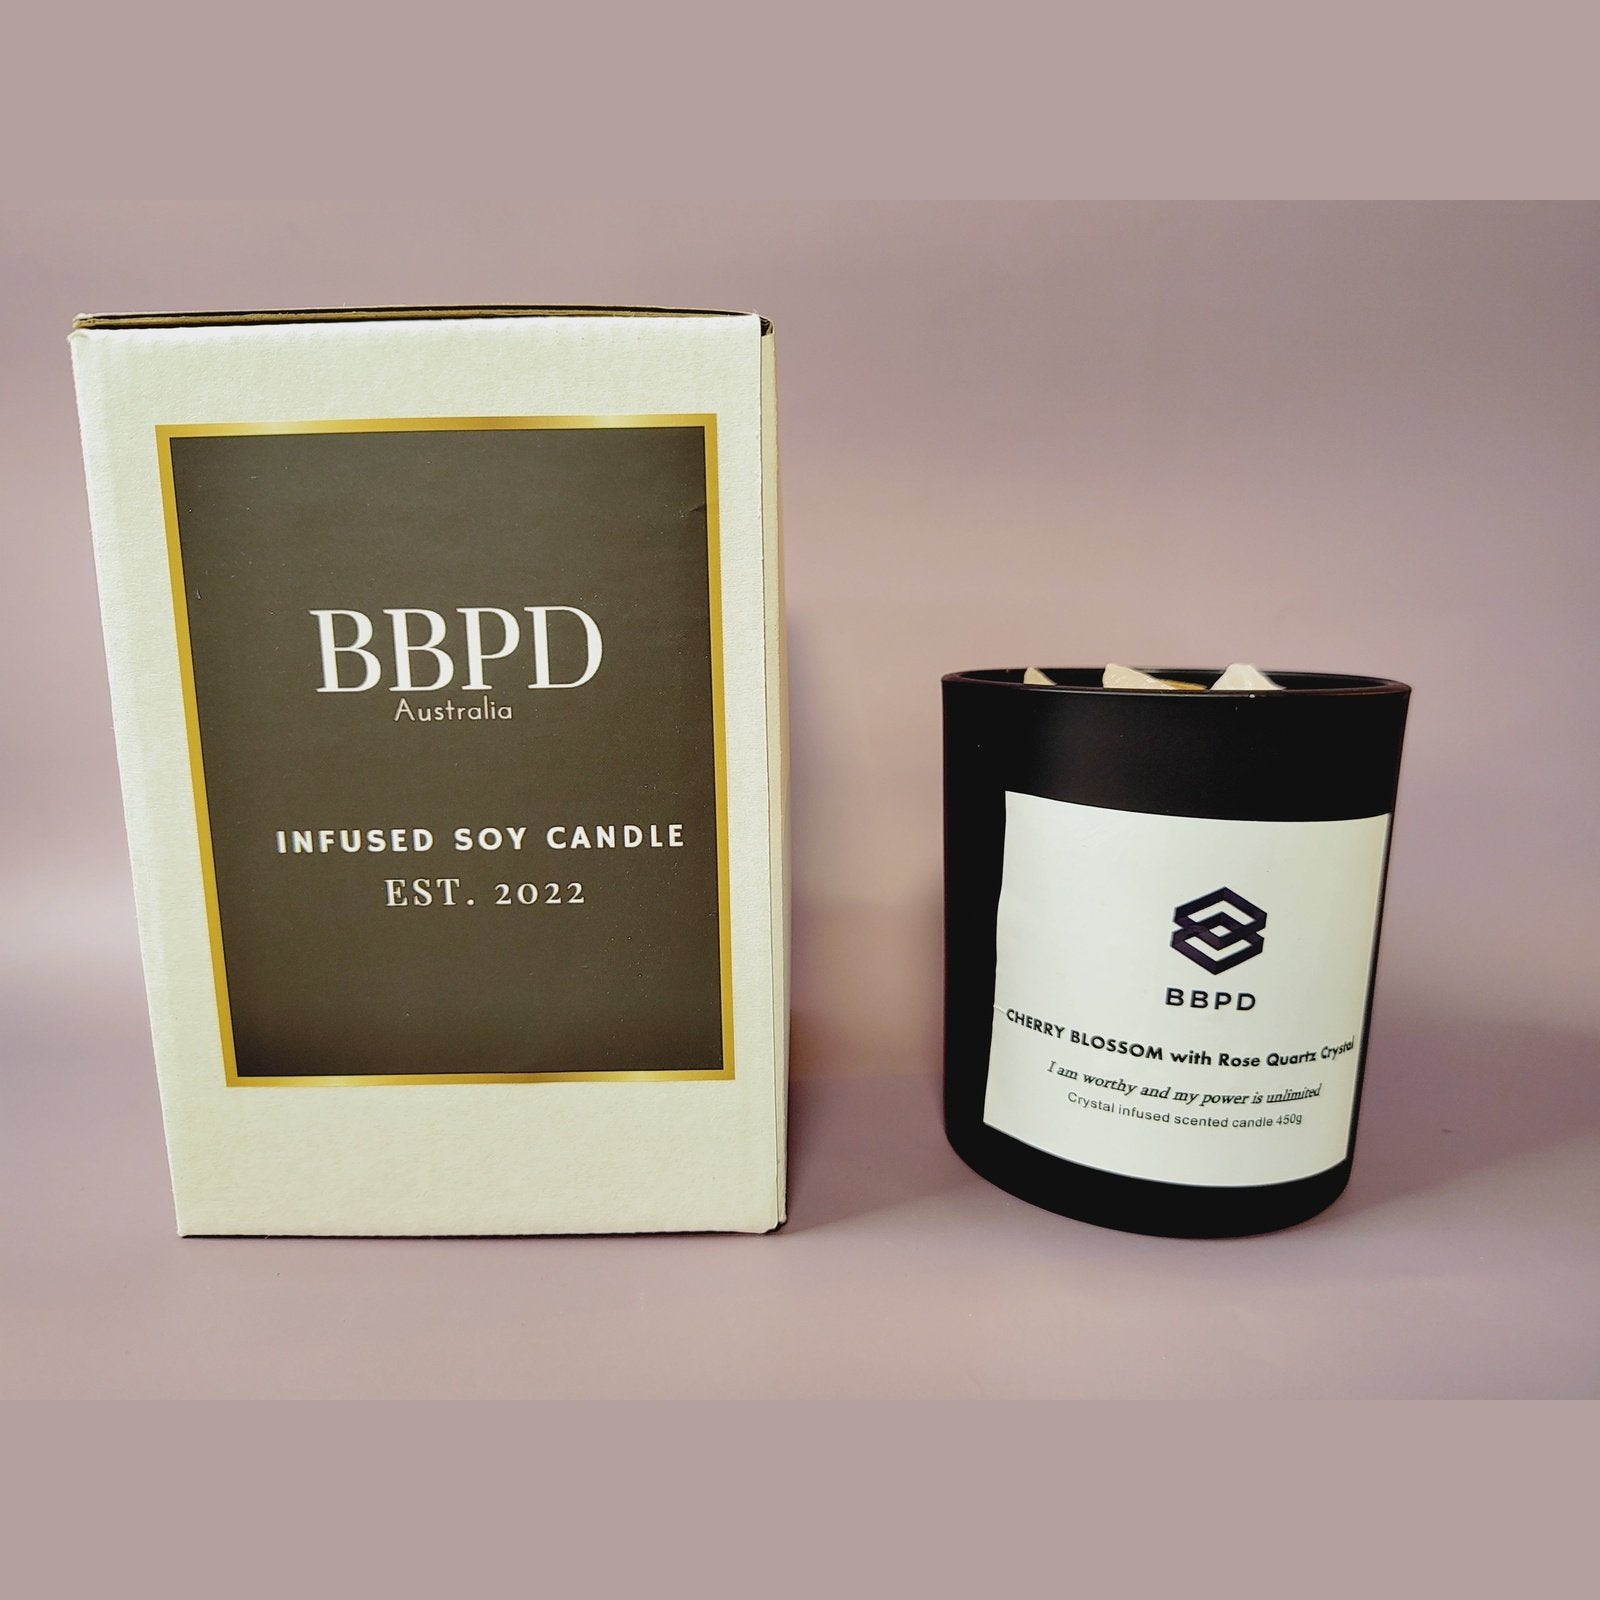 Japanese Cherry Blosson with Rose Quartz Crystal Candle 450g - BBPD